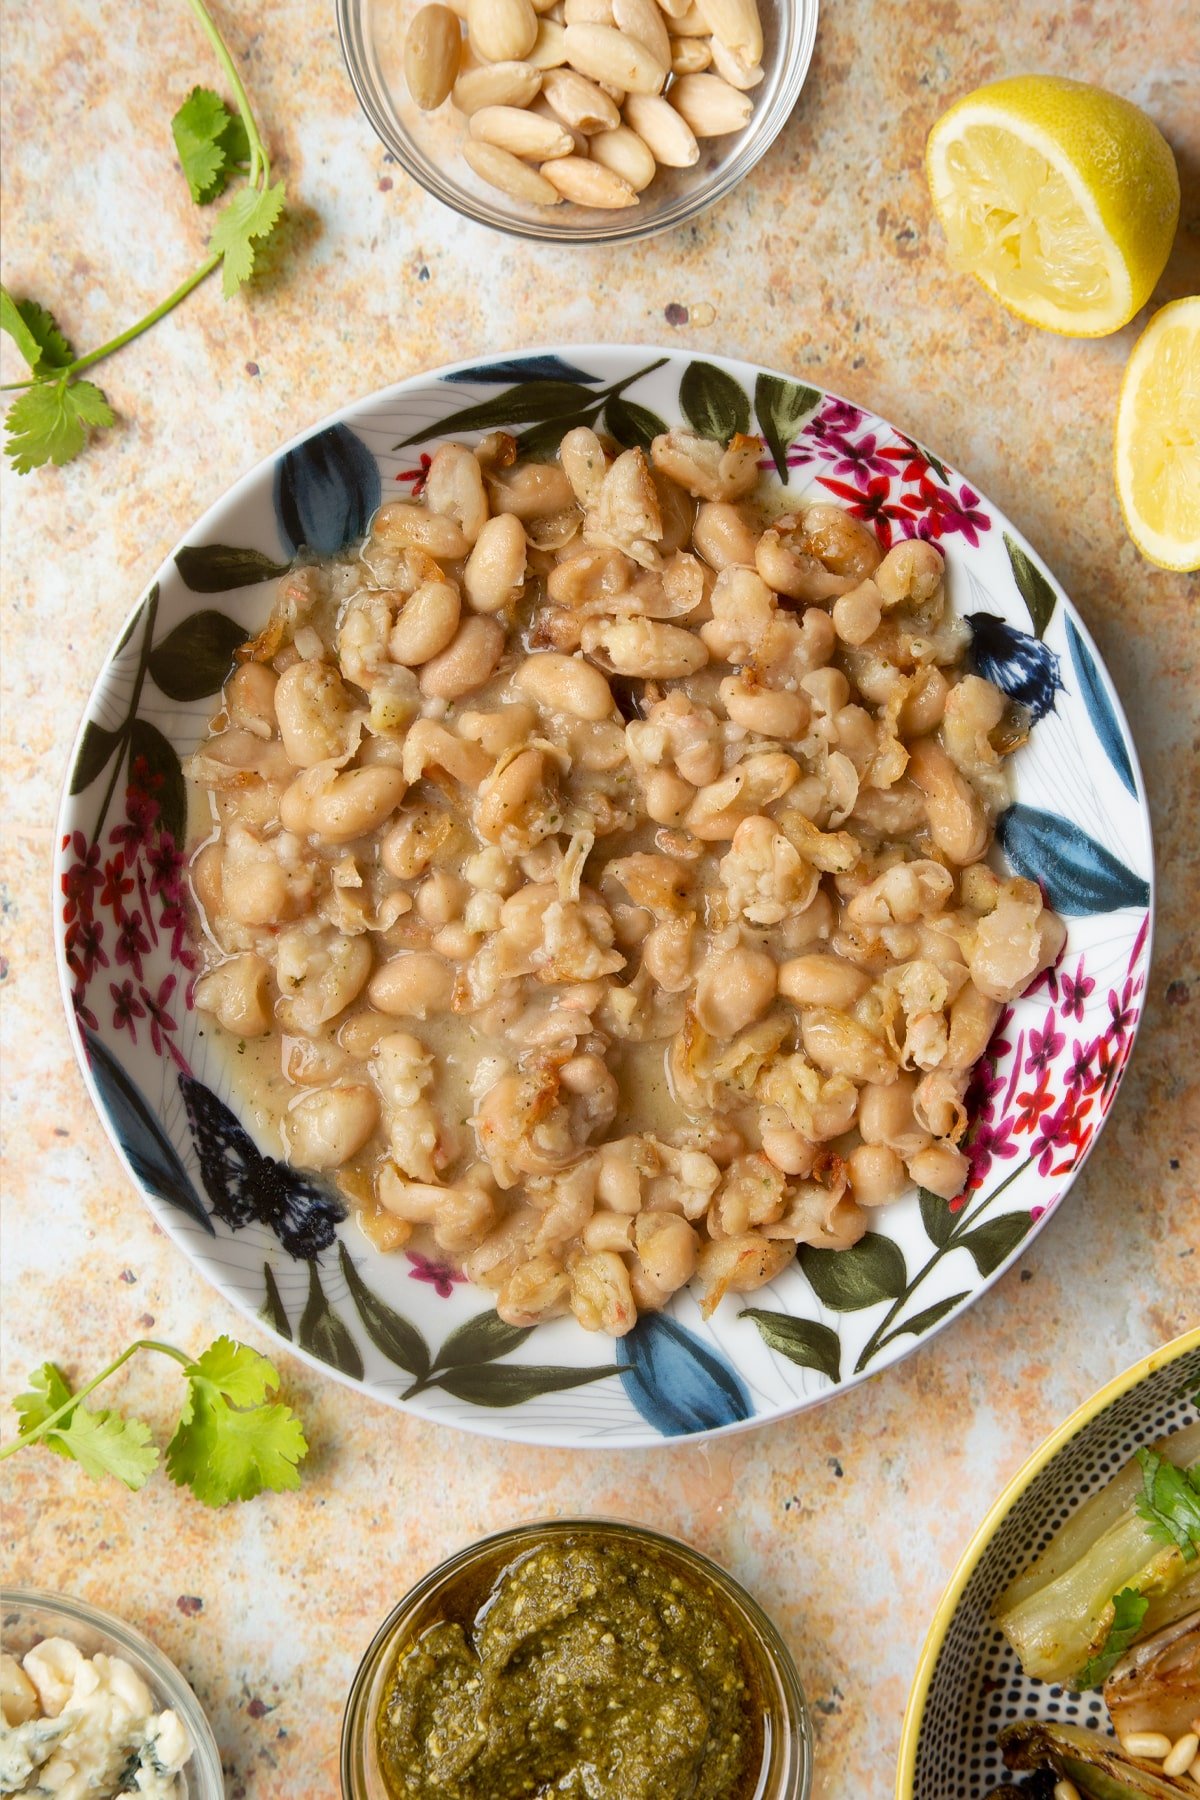 Cooked cannellini beans in a bowl.